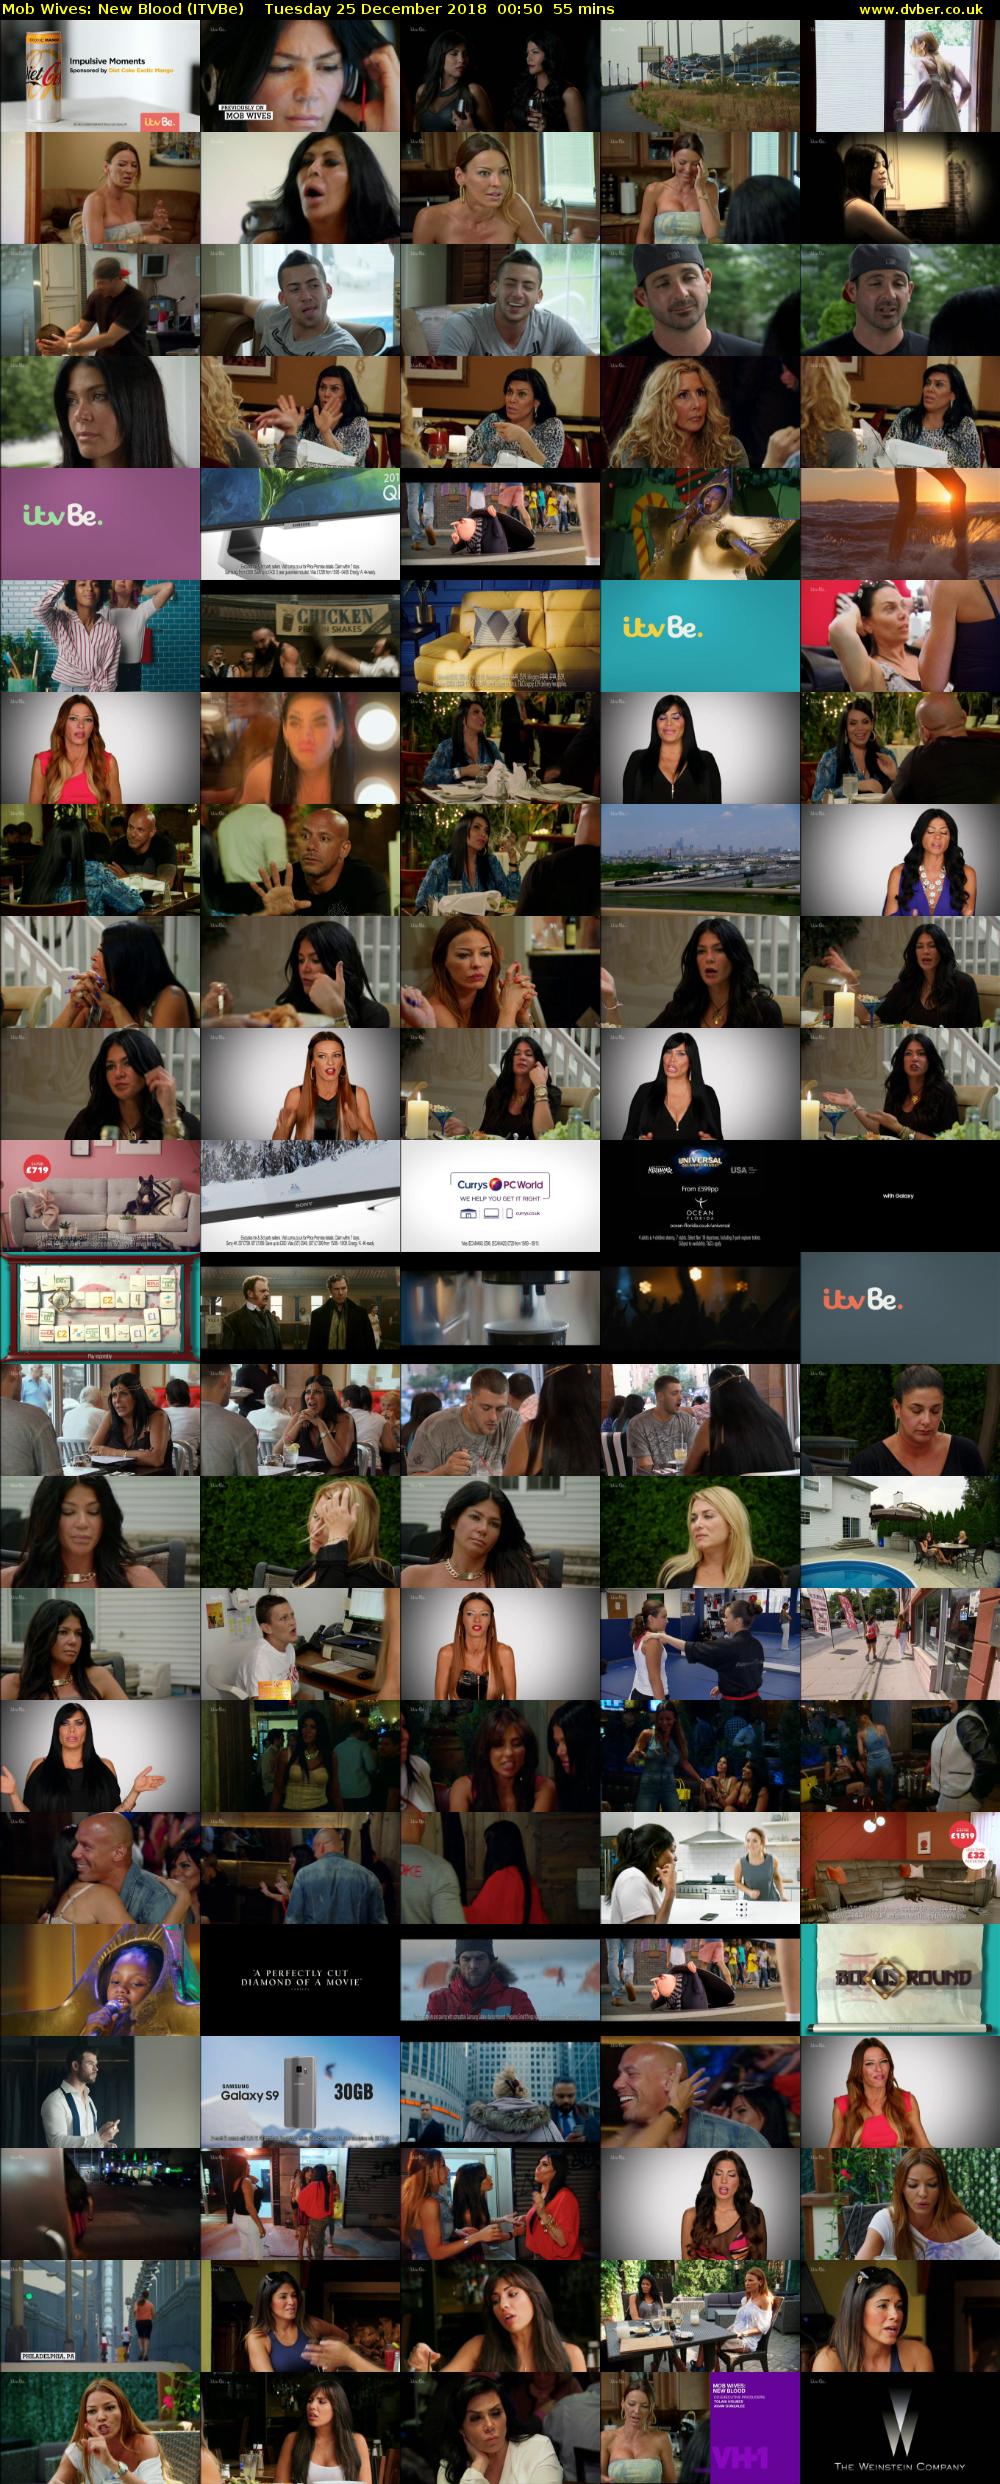 Mob Wives: New Blood (ITVBe) Tuesday 25 December 2018 00:50 - 01:45